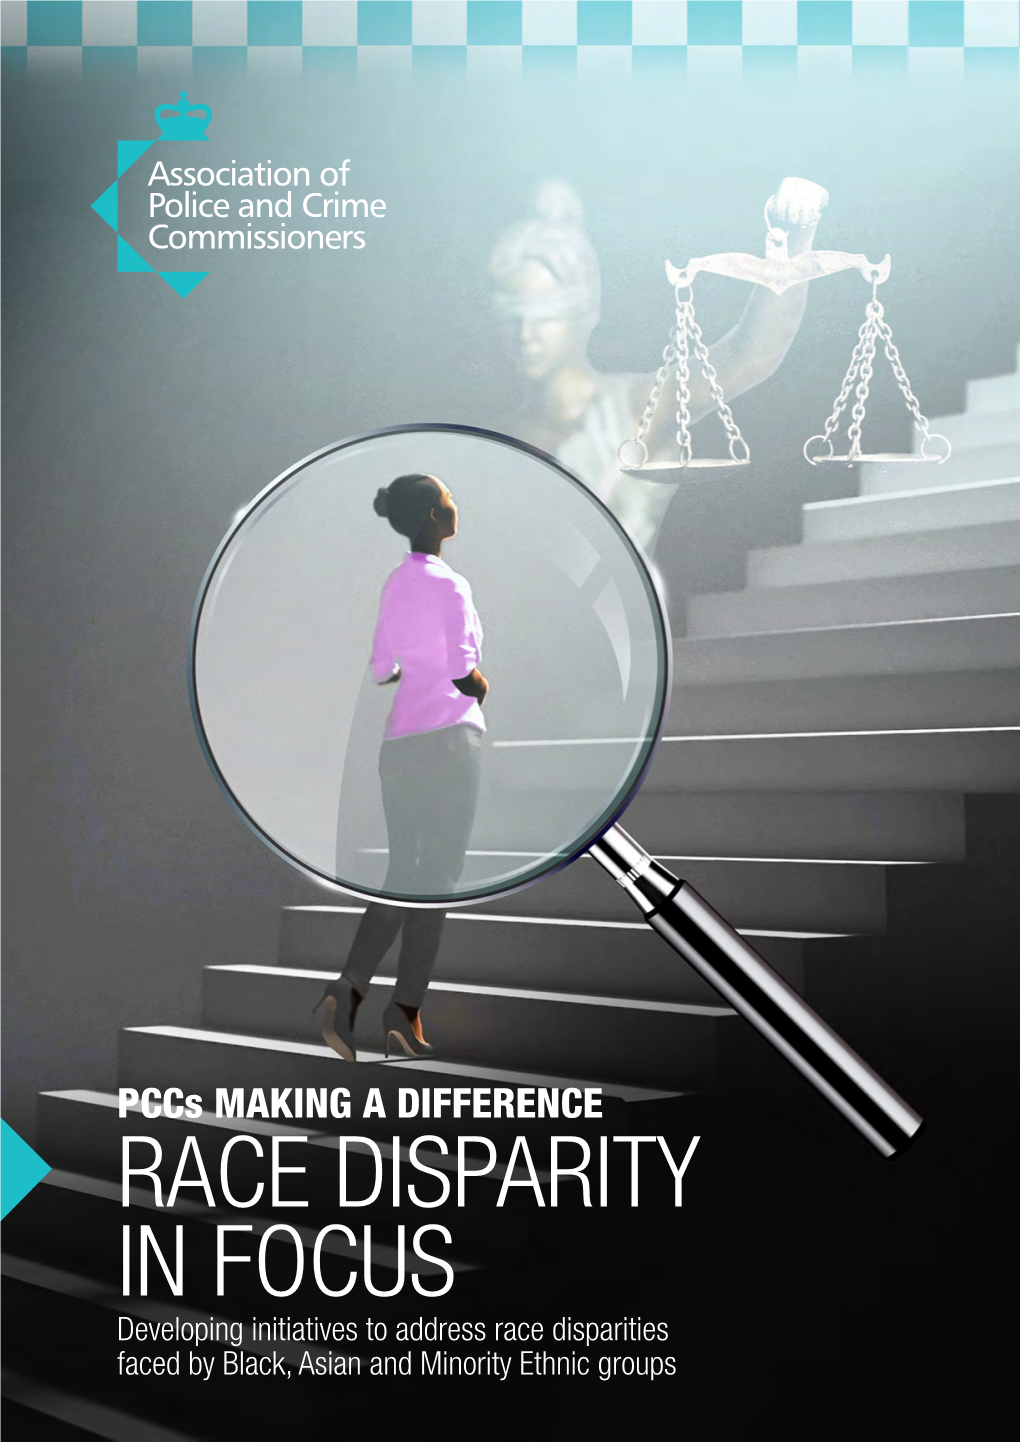 RACE DISPARITY in FOCUS Developing Initiatives to Address Race Disparities Faced by Black, Asian and Minority Ethnic Groups